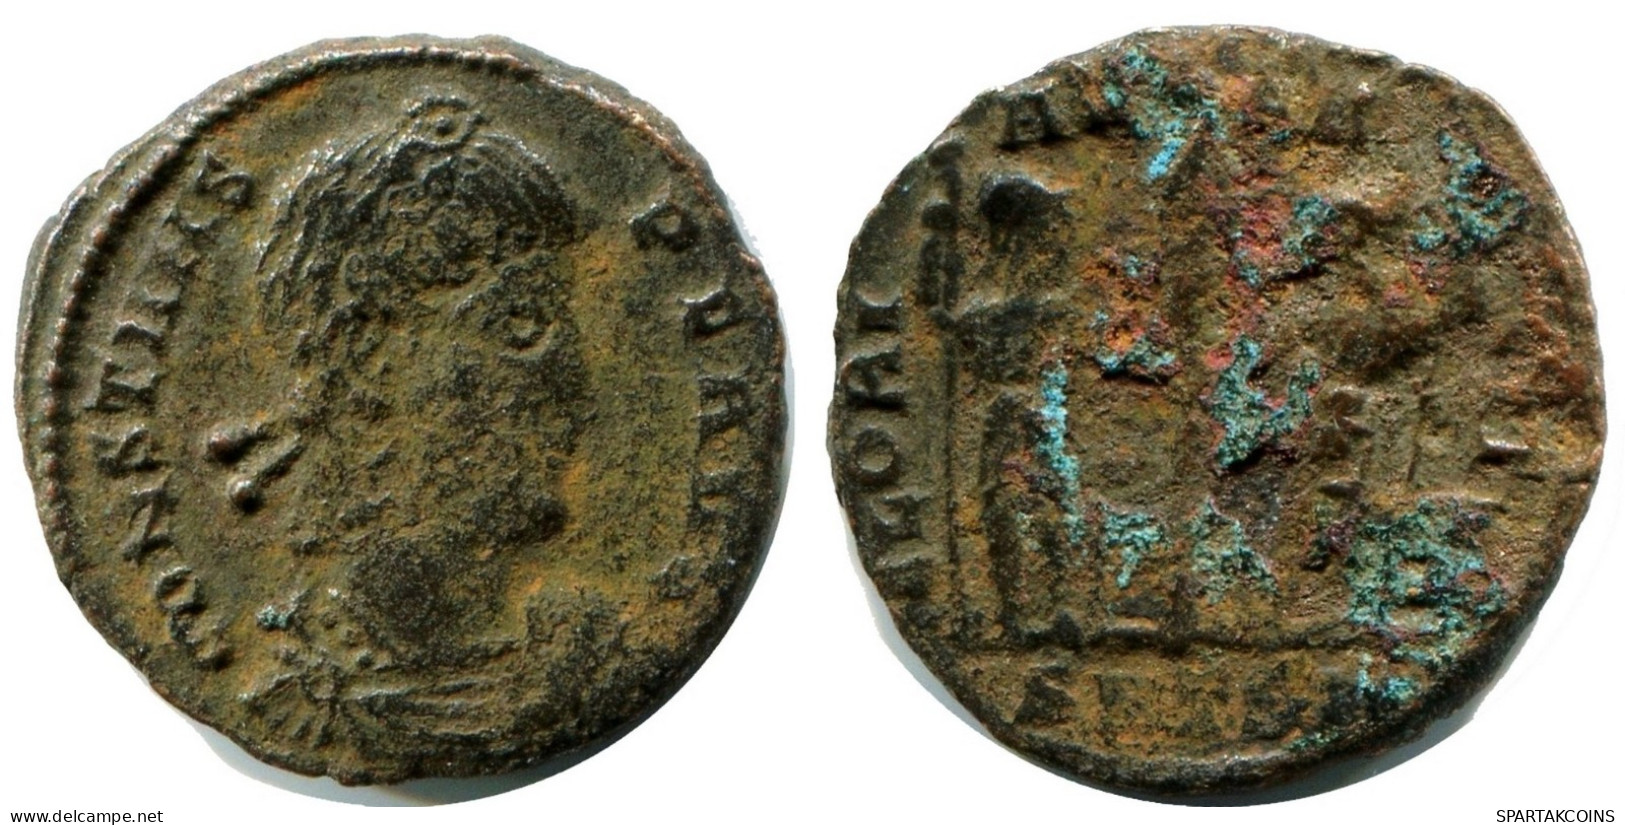 CONSTANS MINTED IN THESSALONICA FROM THE ROYAL ONTARIO MUSEUM #ANC11883.14.F.A - Der Christlischen Kaiser (307 / 363)